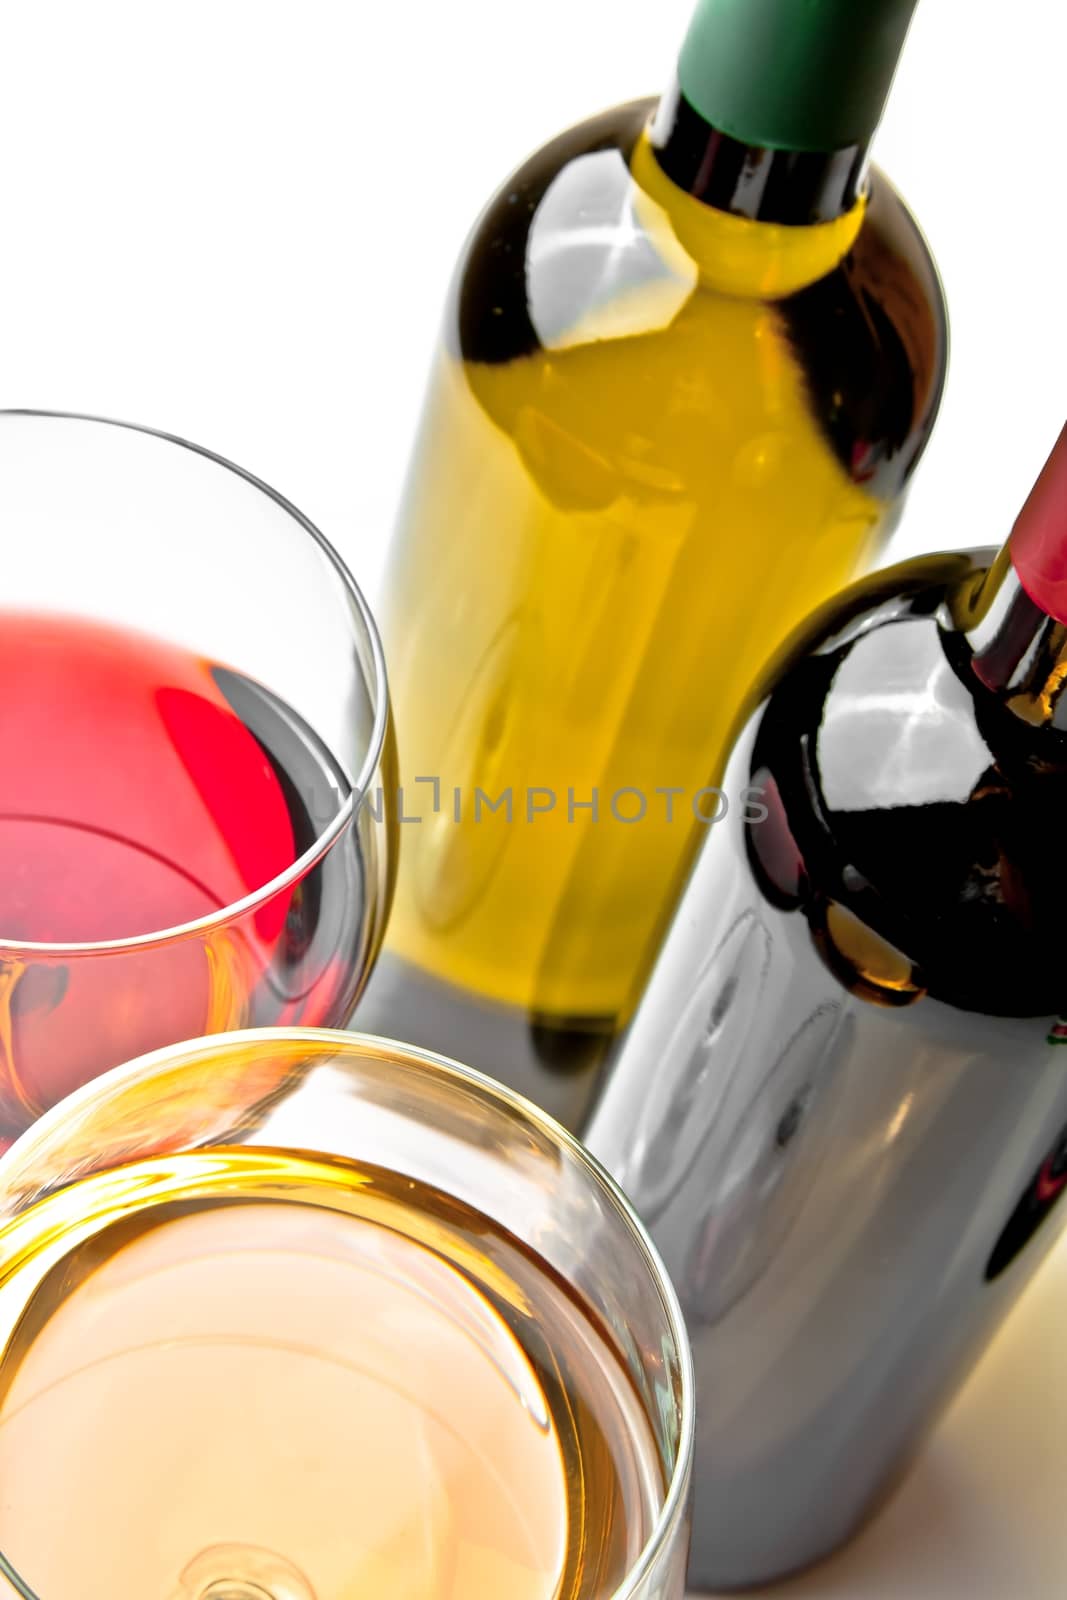 red and white wine glasses near wine bottles on white background